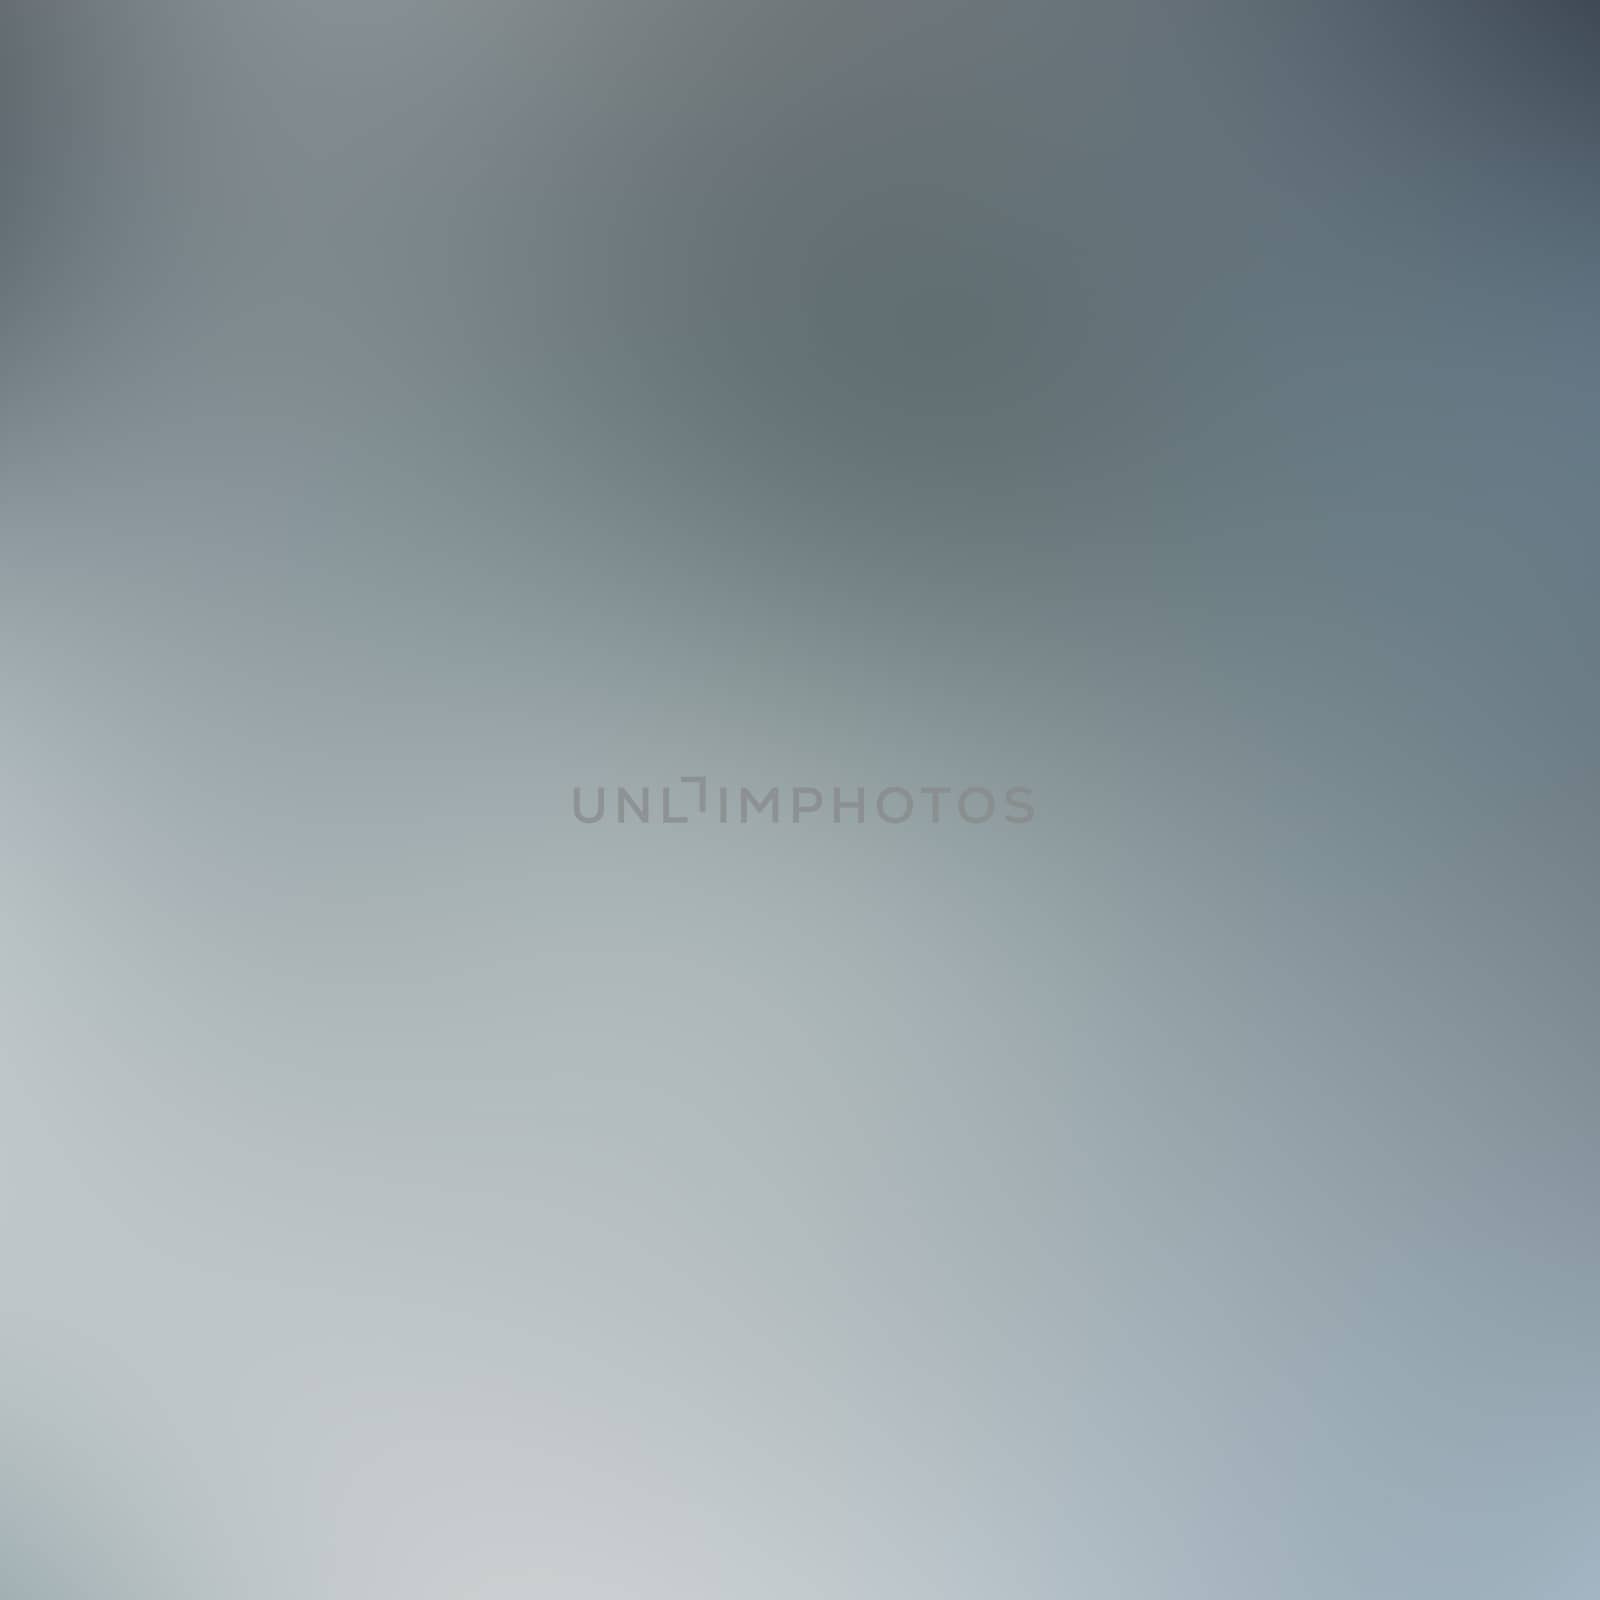 Silver grey tone. Abstract background wallpaper use for presentation.